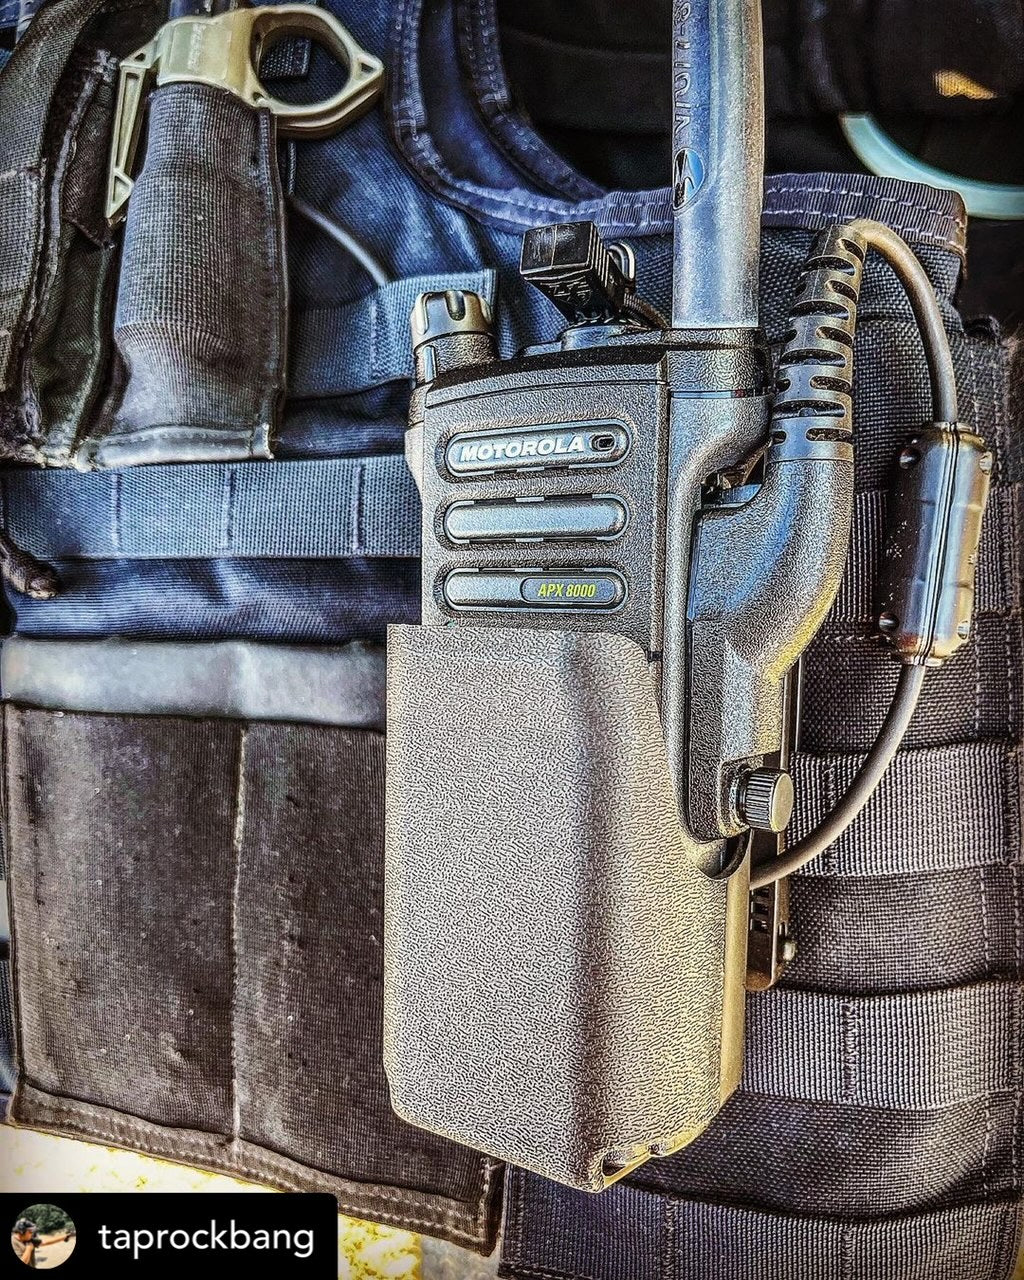 MOLLE Tactical Radio Pouch – TheSurvivalOutpost